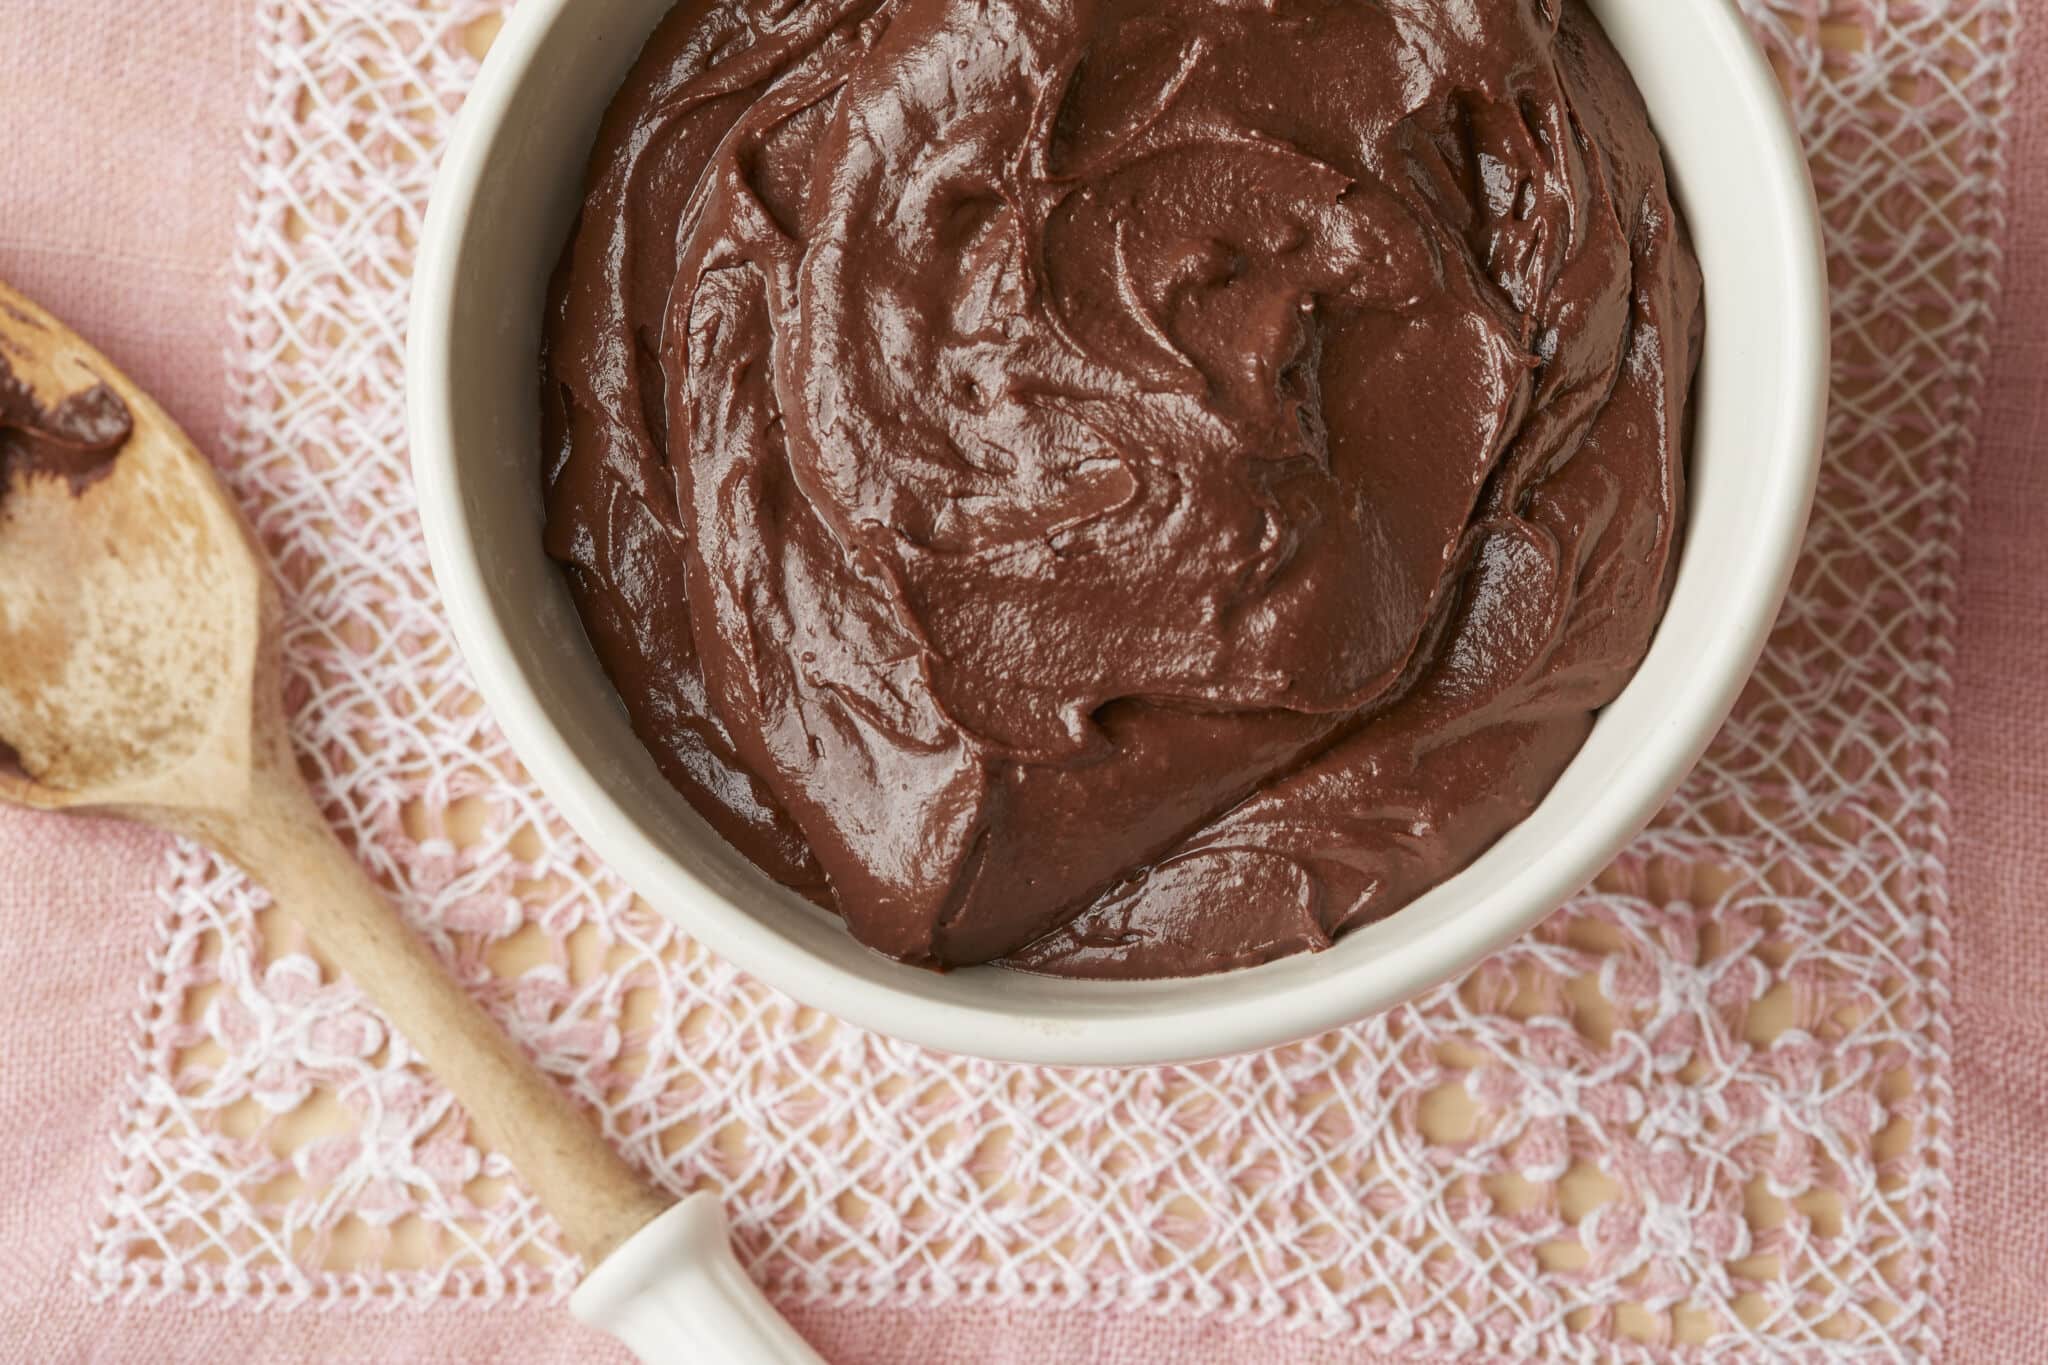 A bowl of shinny, silky smooth and thick Chocolate Pastry Cream is ready to use.